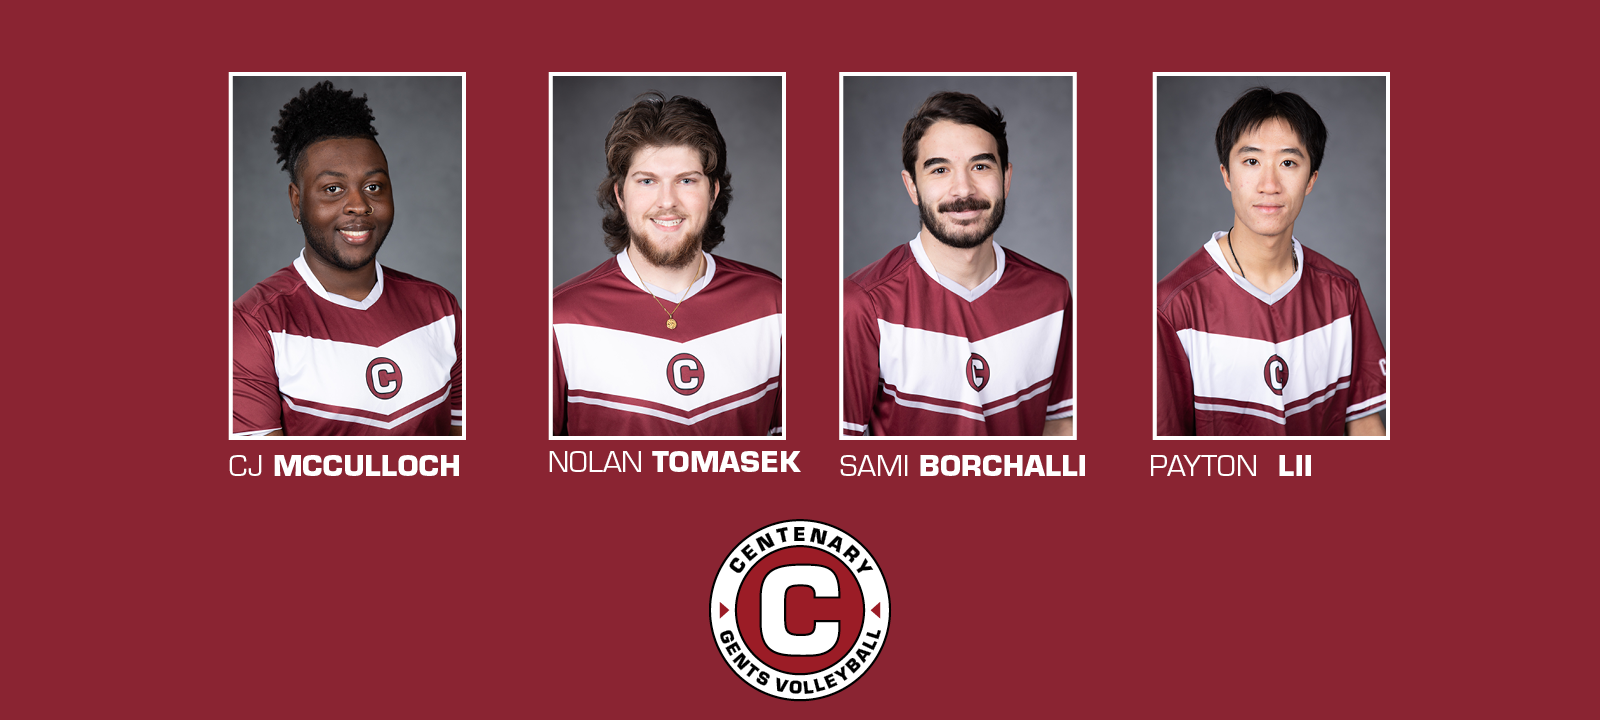 The Gents will honor their four seniors prior to Tuesday's home match.